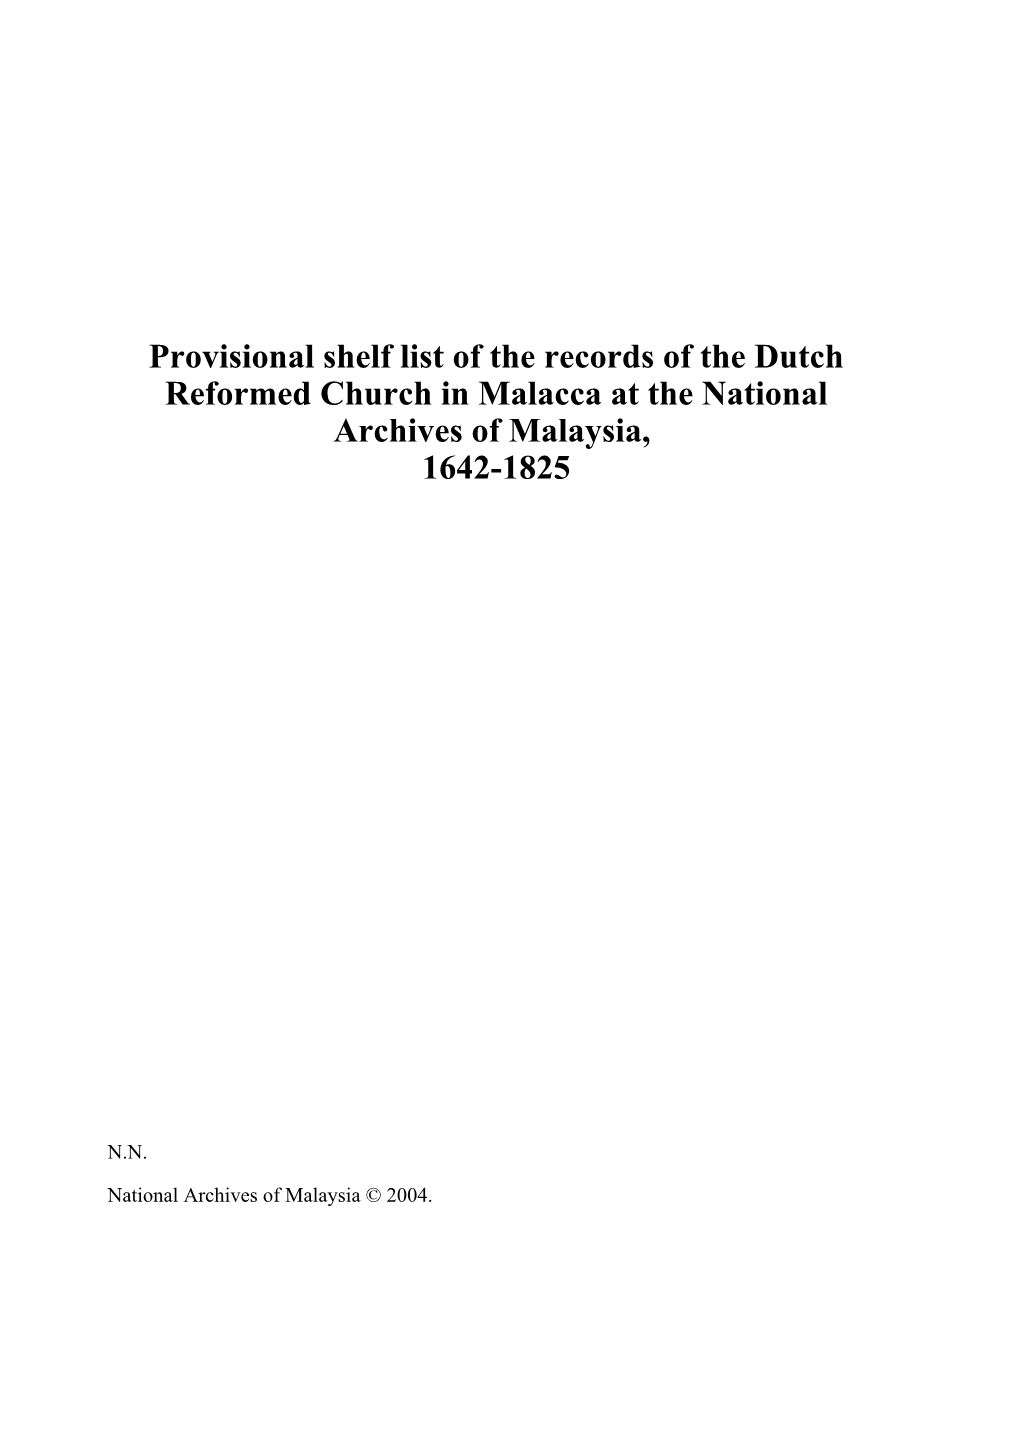 Provisional Shelf List of the Records of the Dutch Reformed Church in Malacca at the National Archives of Malaysia, 1642-1825